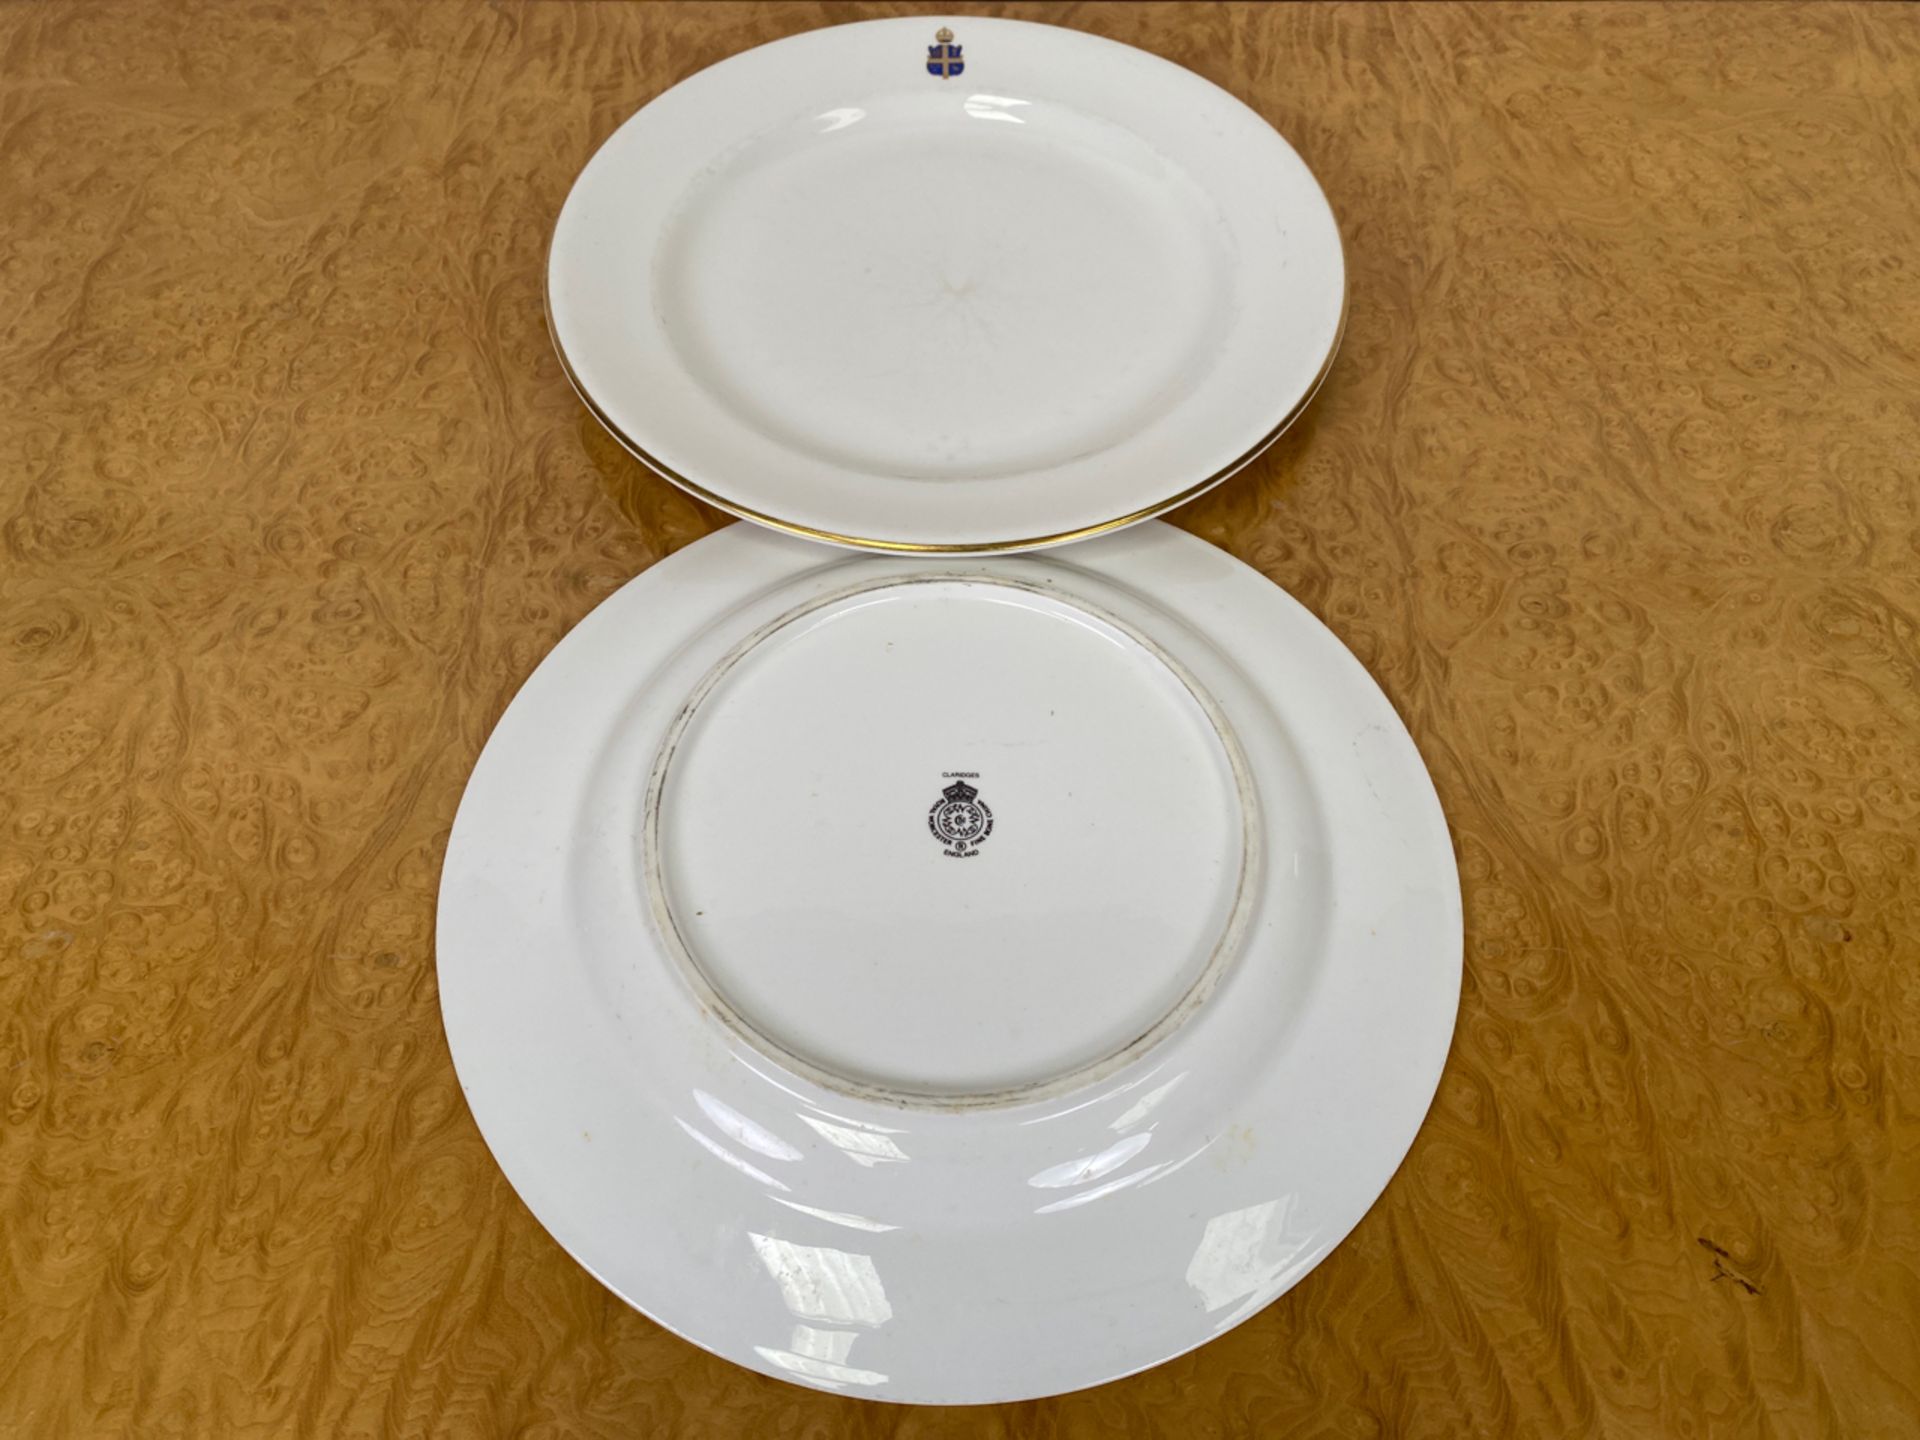 Set of Crested Crockery for Claridge's by Chommette 1884 - Image 29 of 44